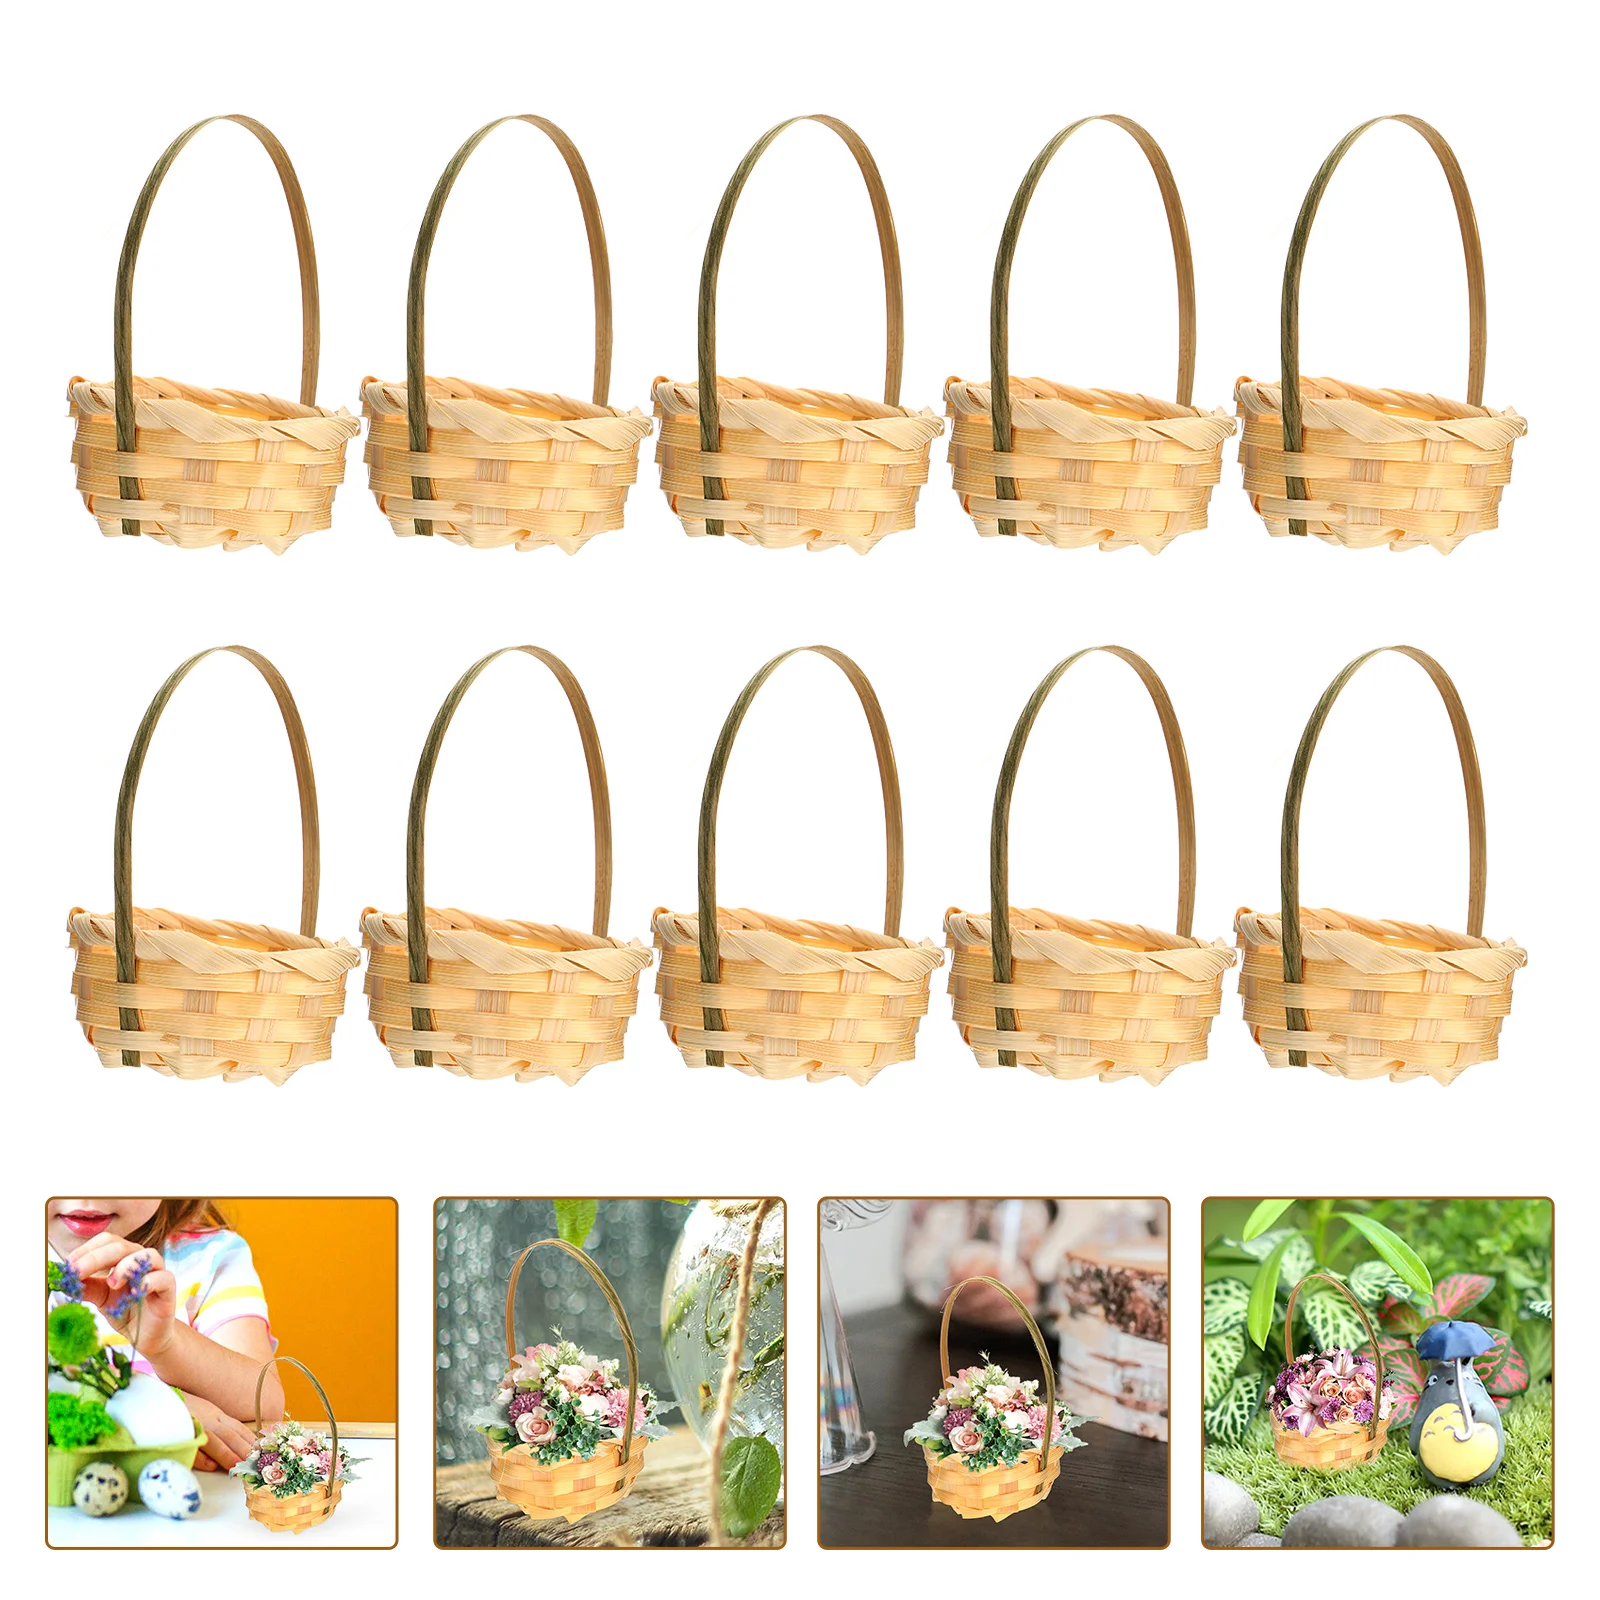 

Basket Baskets Mini Woven Flower Picnic Rattan Miniature Storage Wicker Gift Fruit Candy Tiny Favor Hand Packing Easter Egg